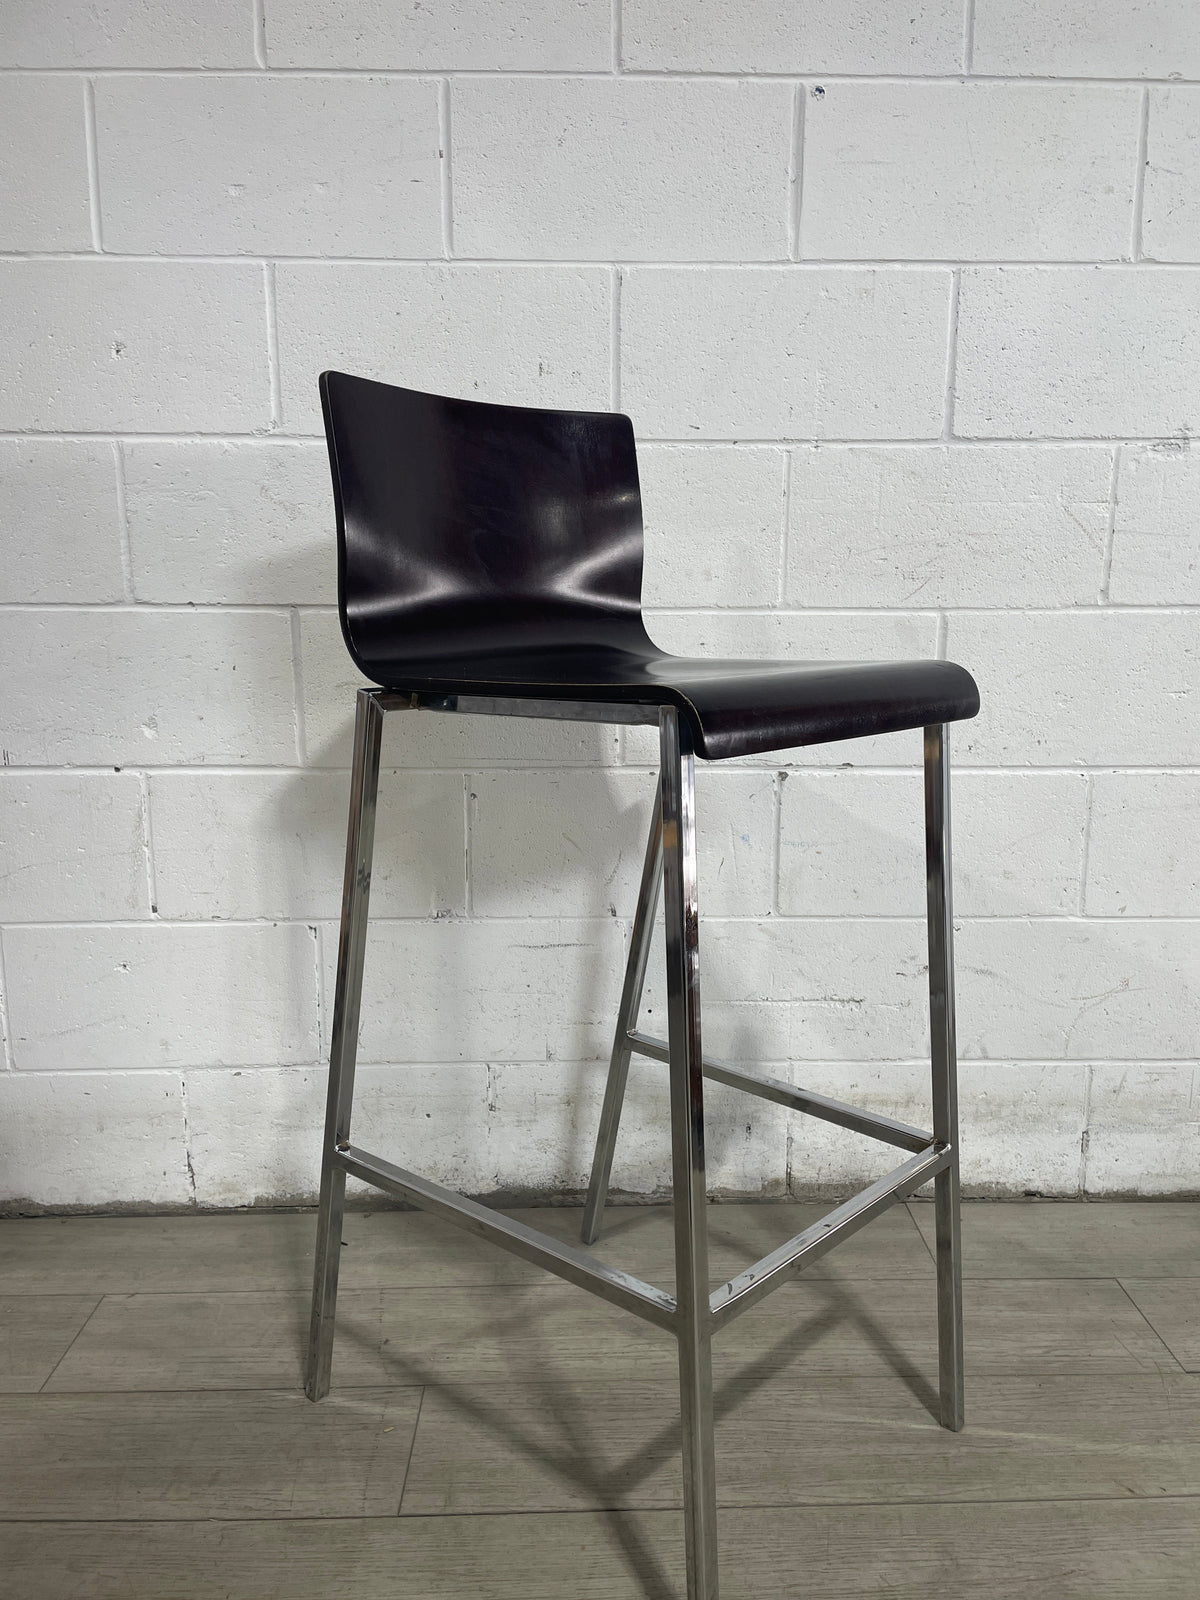 Curved Wood Bar Stool with Metal Frame